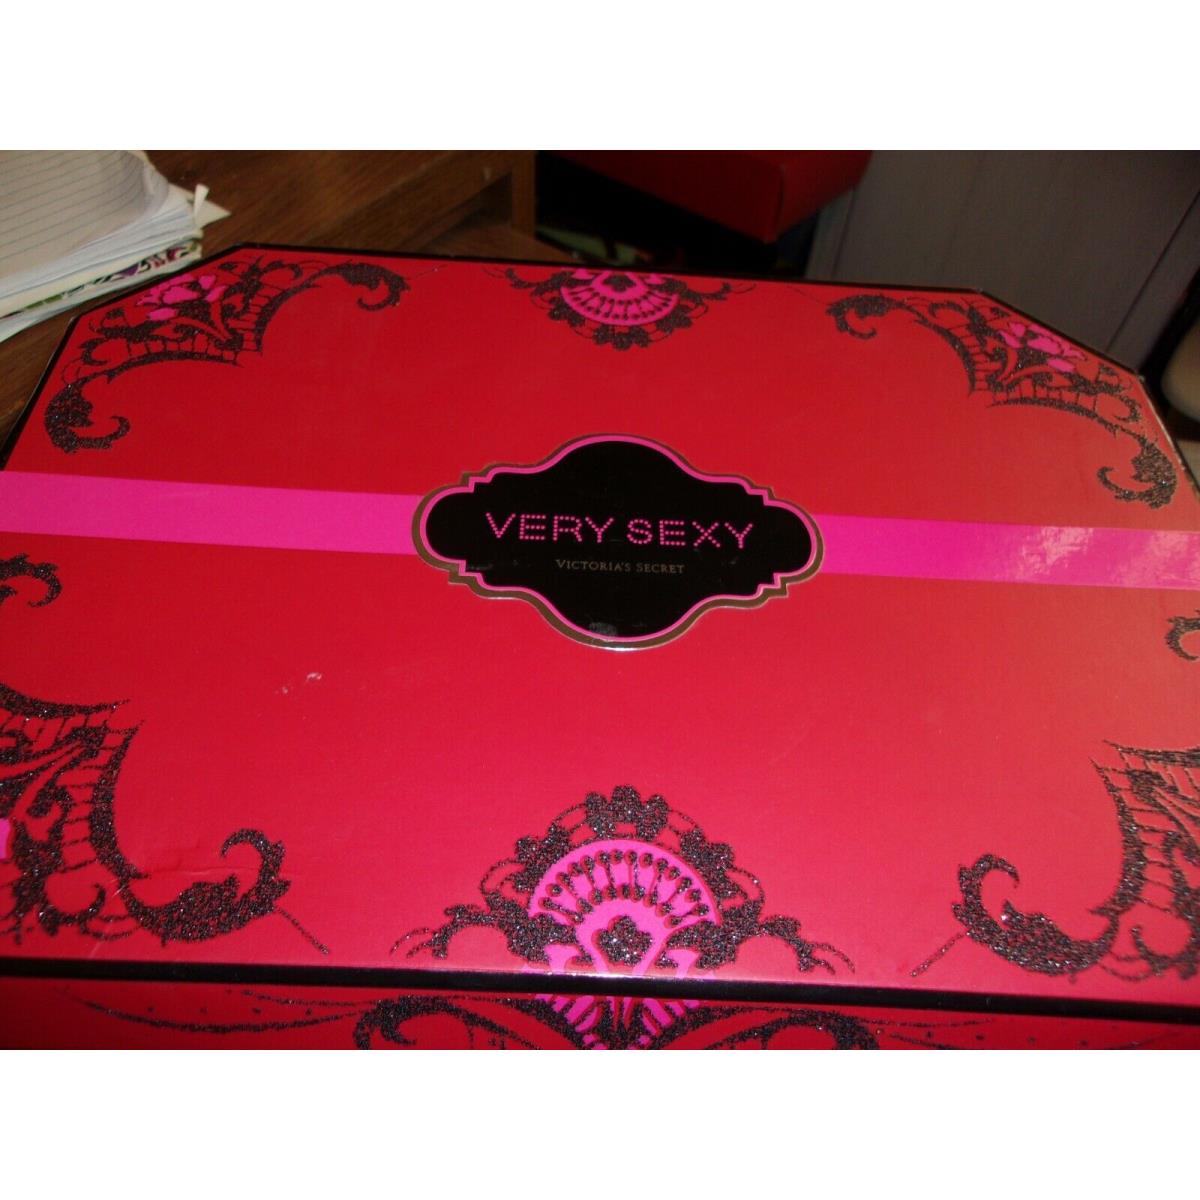 Victoria`s Secret Very Sexy 4 Piece Fragrance Lotion Gift Set Deluxe